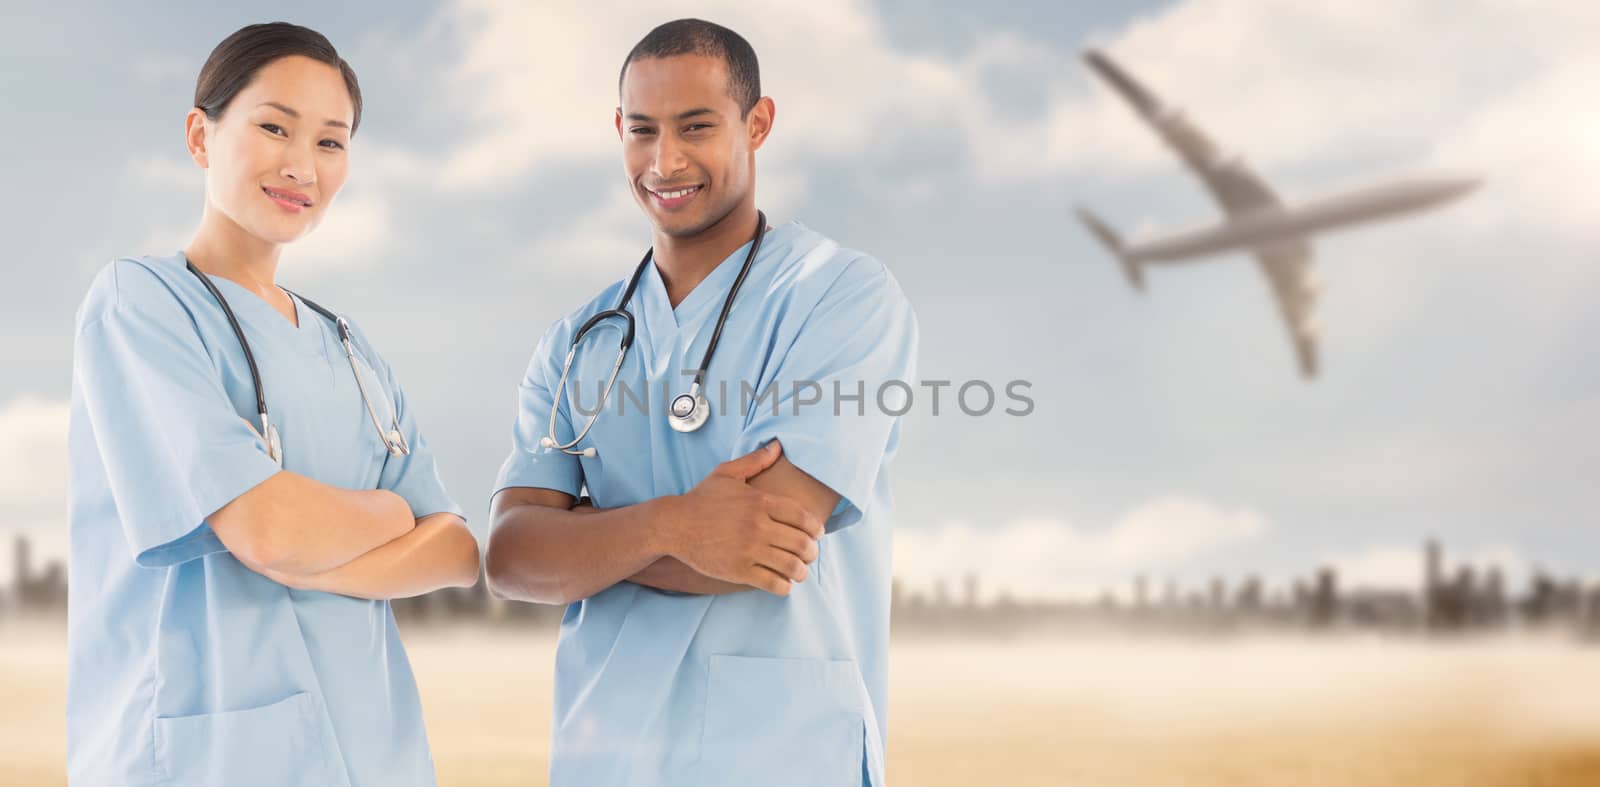 Confident surgeons with arms crossed in hospital against large city on the horizon